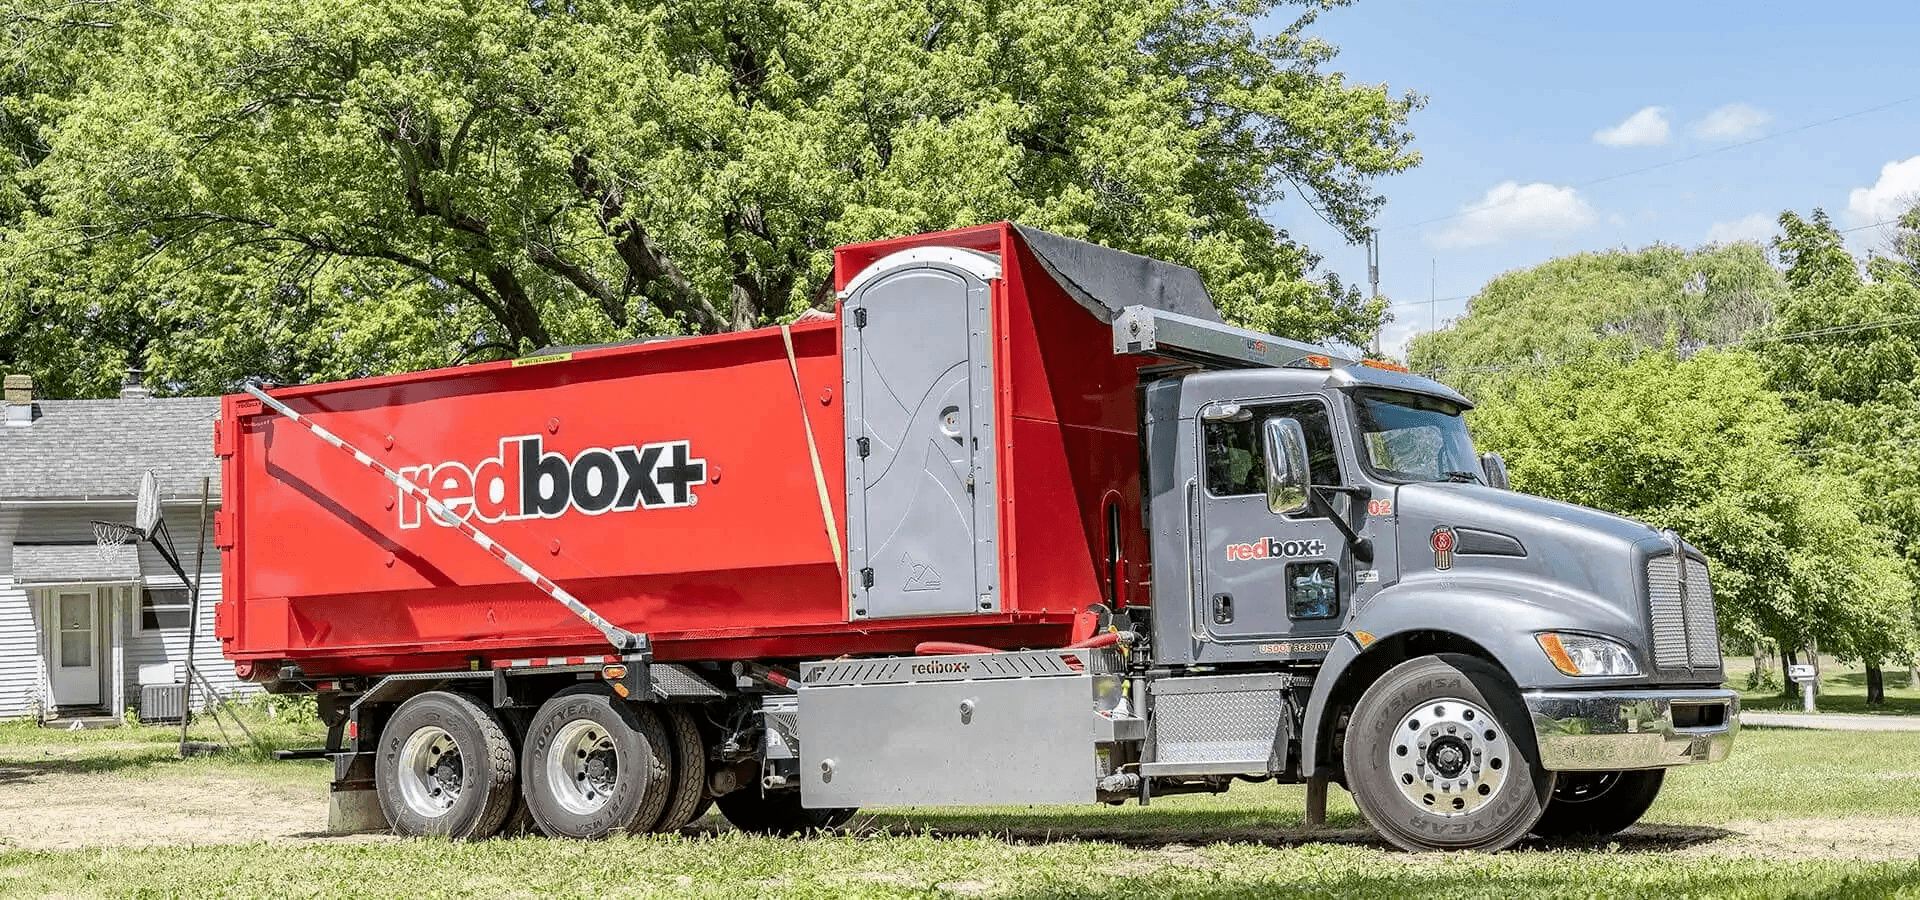 roll-off dumpster rental from redbox+ Dumpsters of Greater San Antonio in live oak texas